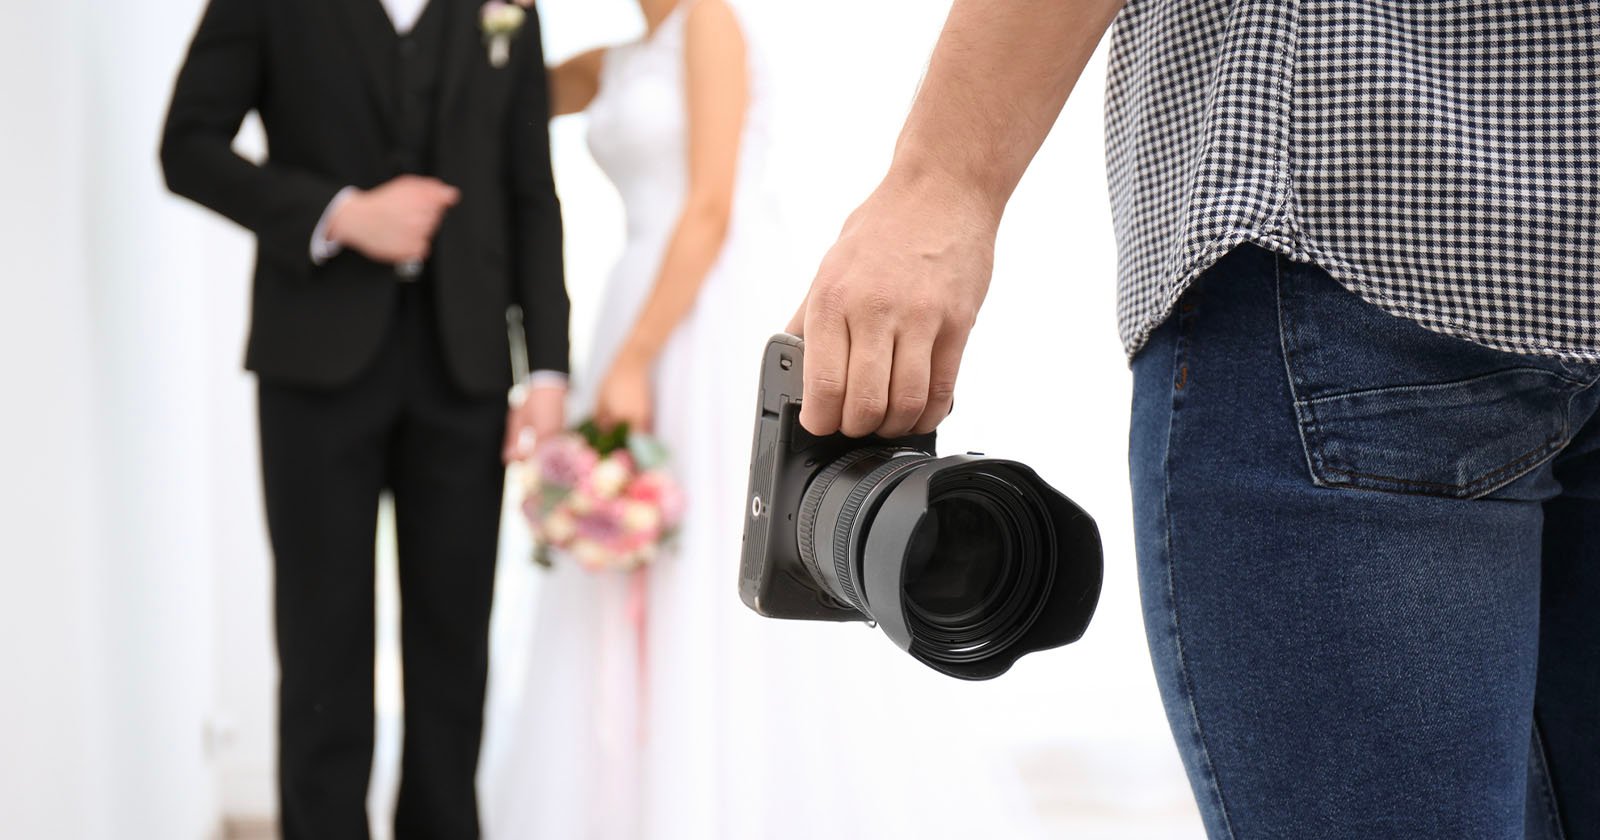  wedding photographer fined 000 using taken other 